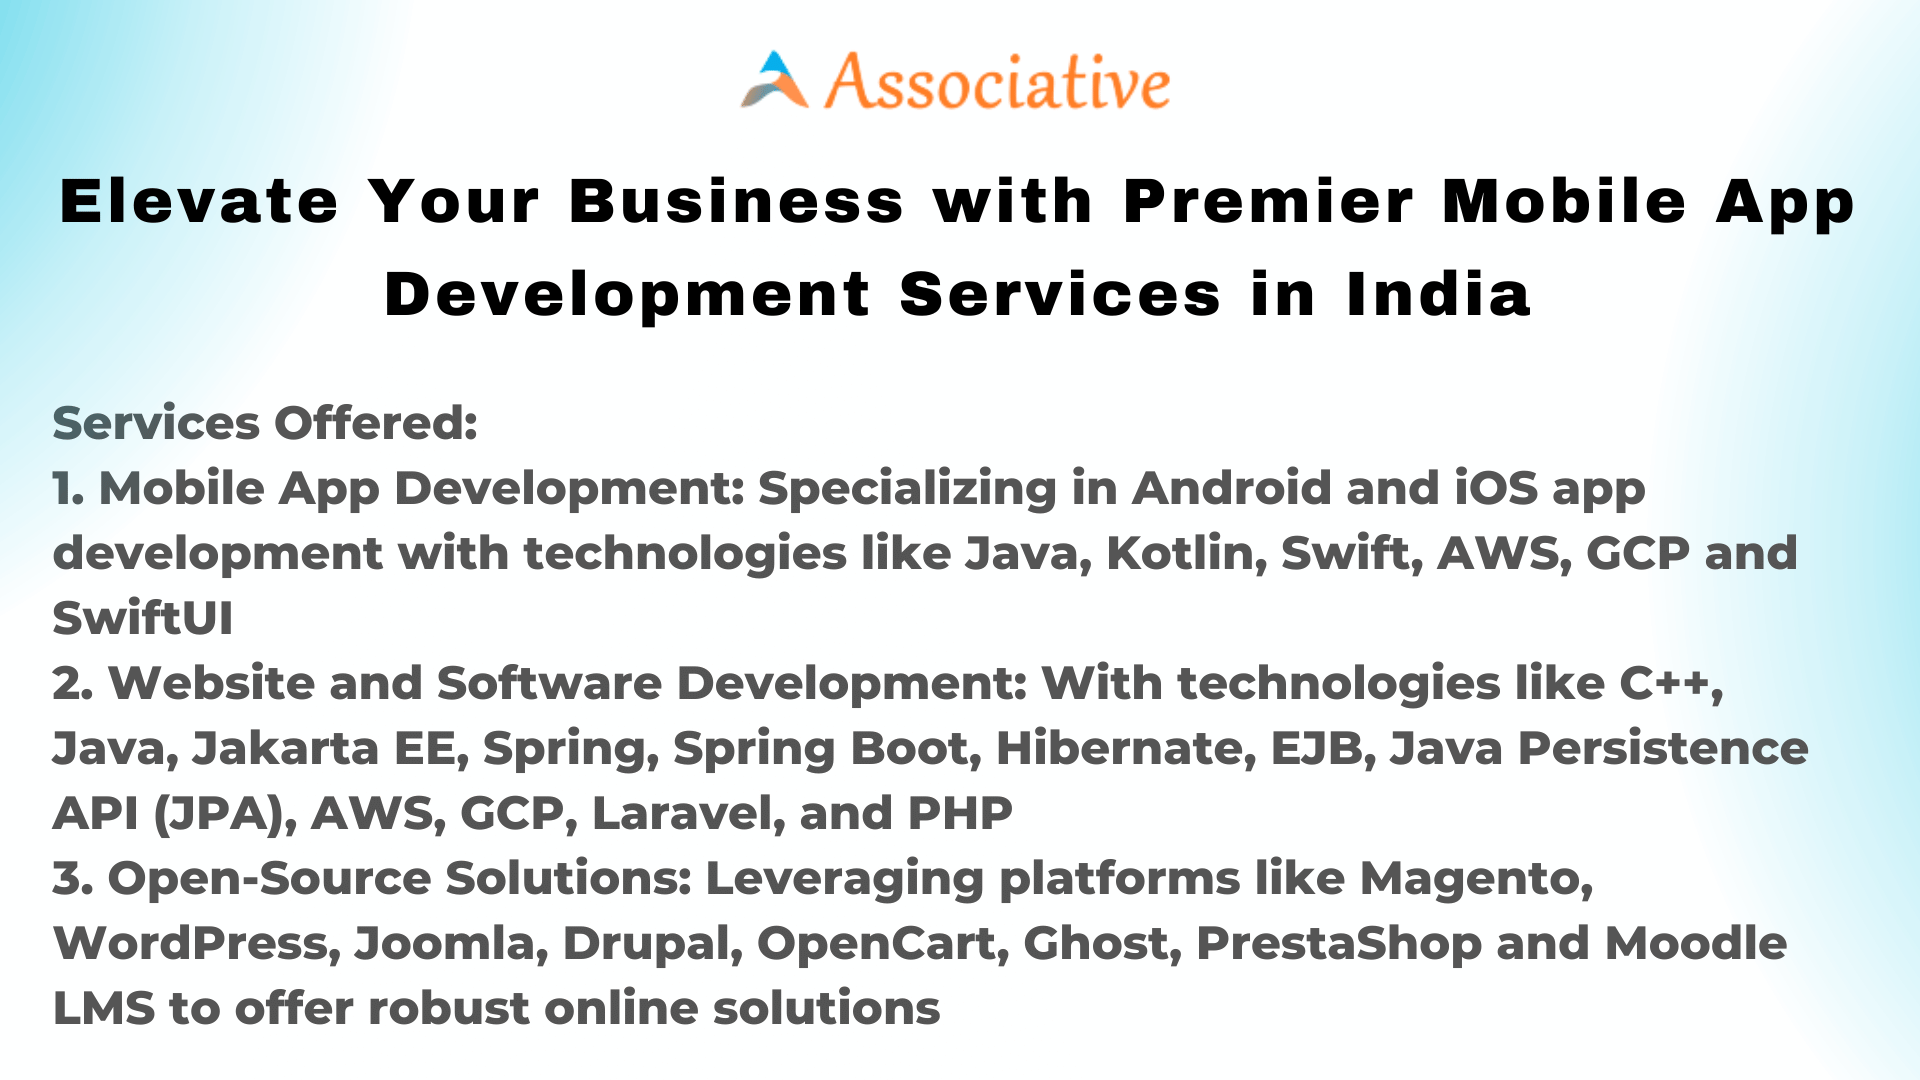 Elevate Your Business with Premier Mobile App Development Services in India